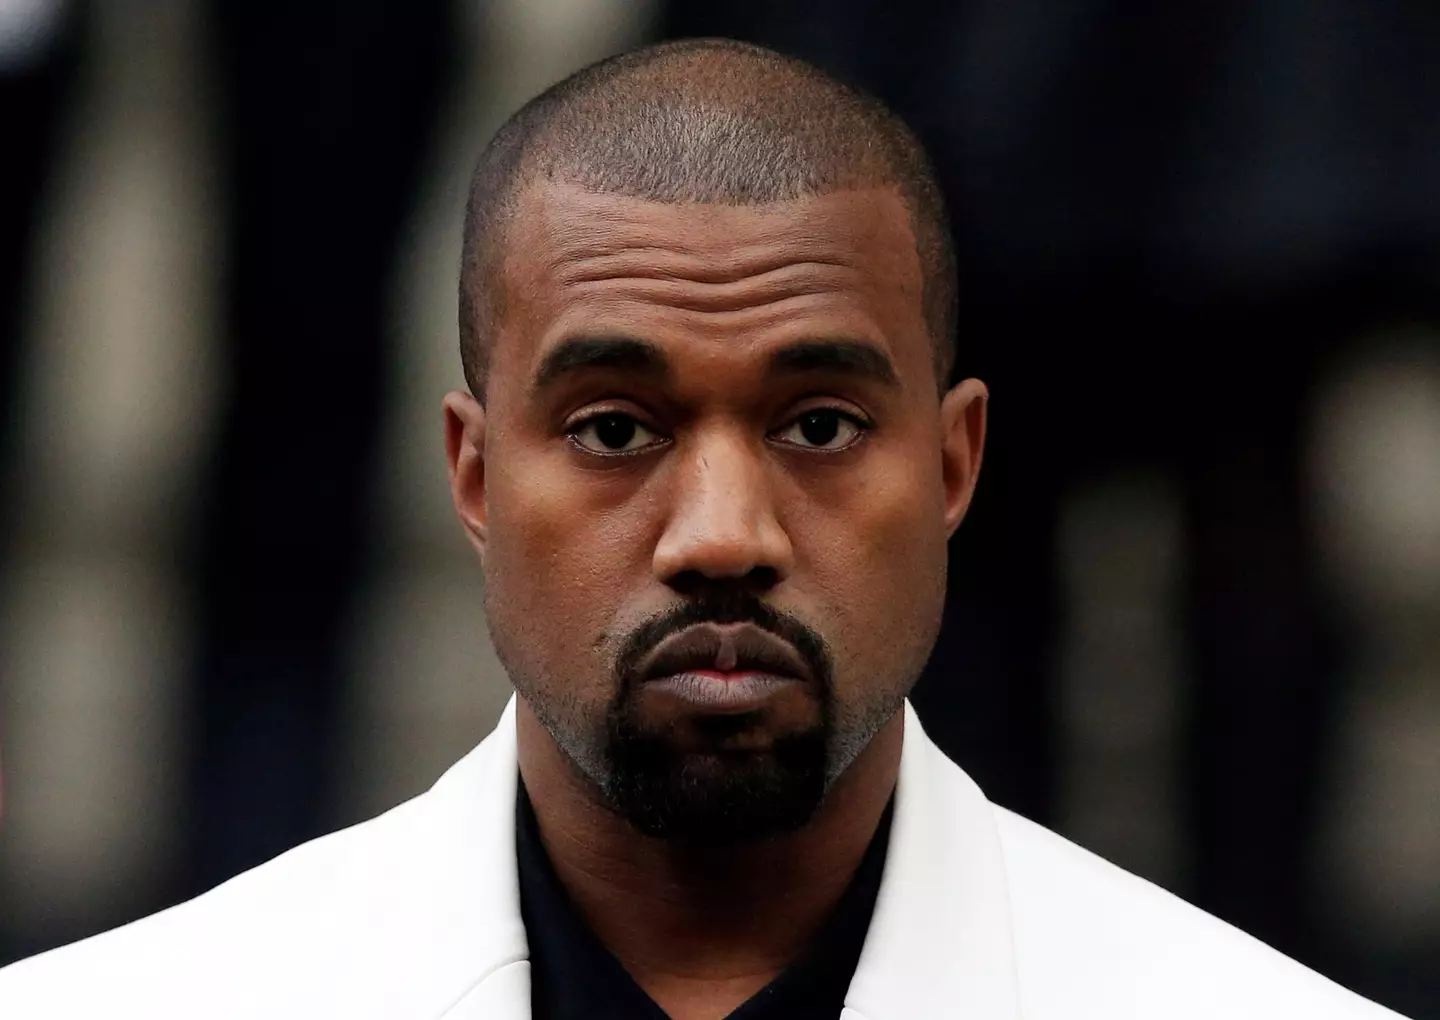 Kanye West also hit out at brands that had dropped him following his anti-semitic remarks.